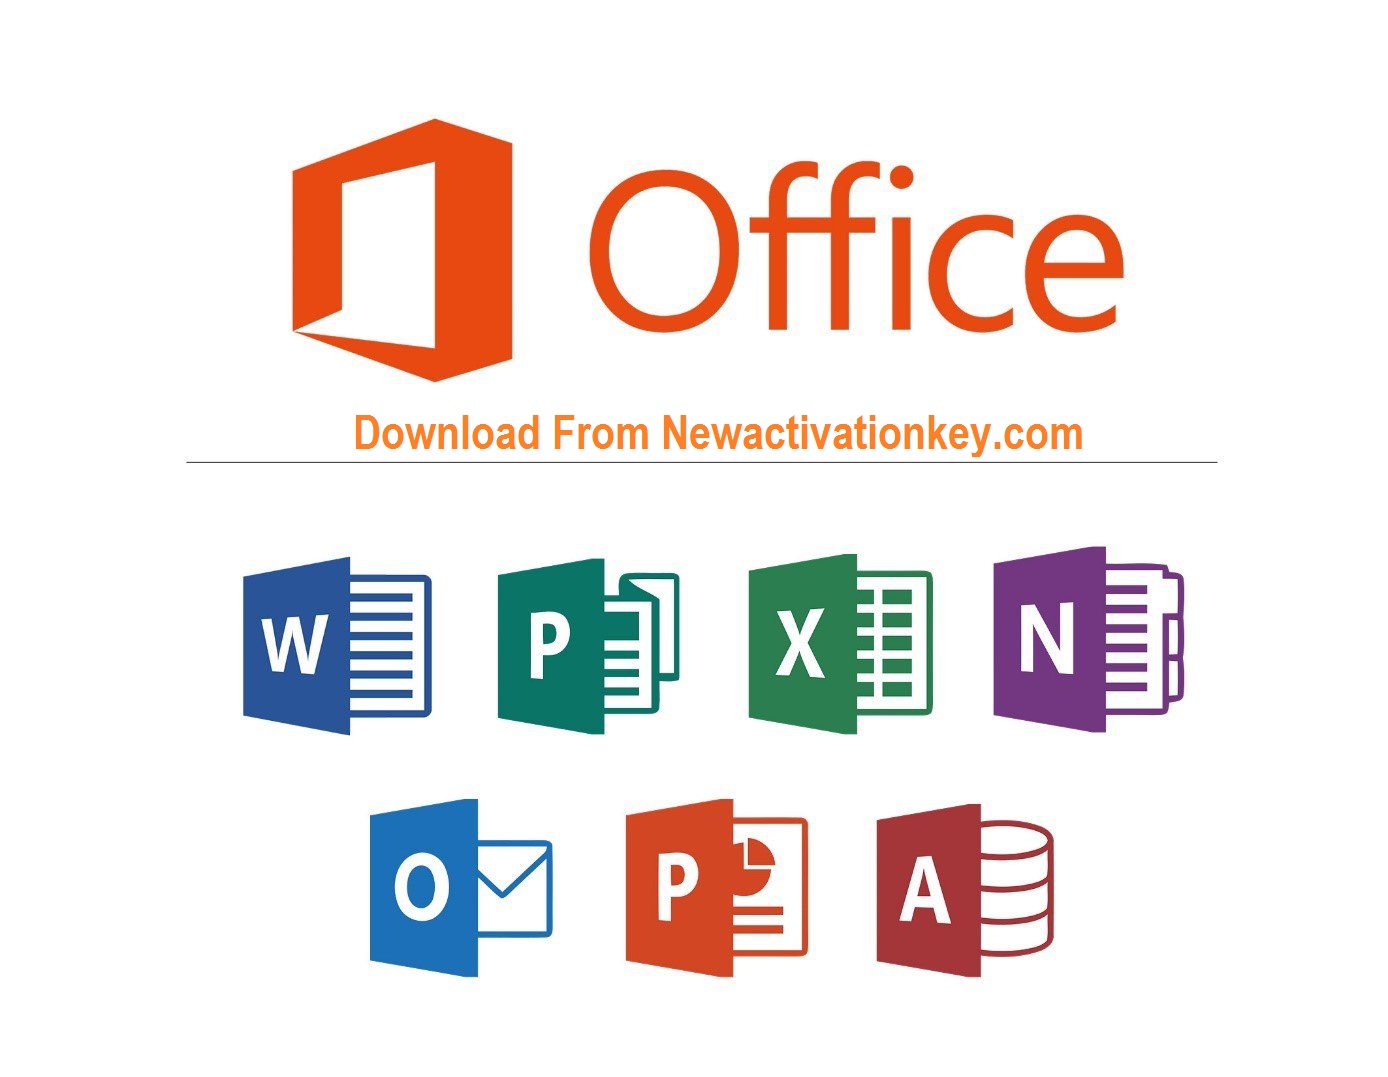 Where To Download Microsoft Office 2010 For Mac downmfile